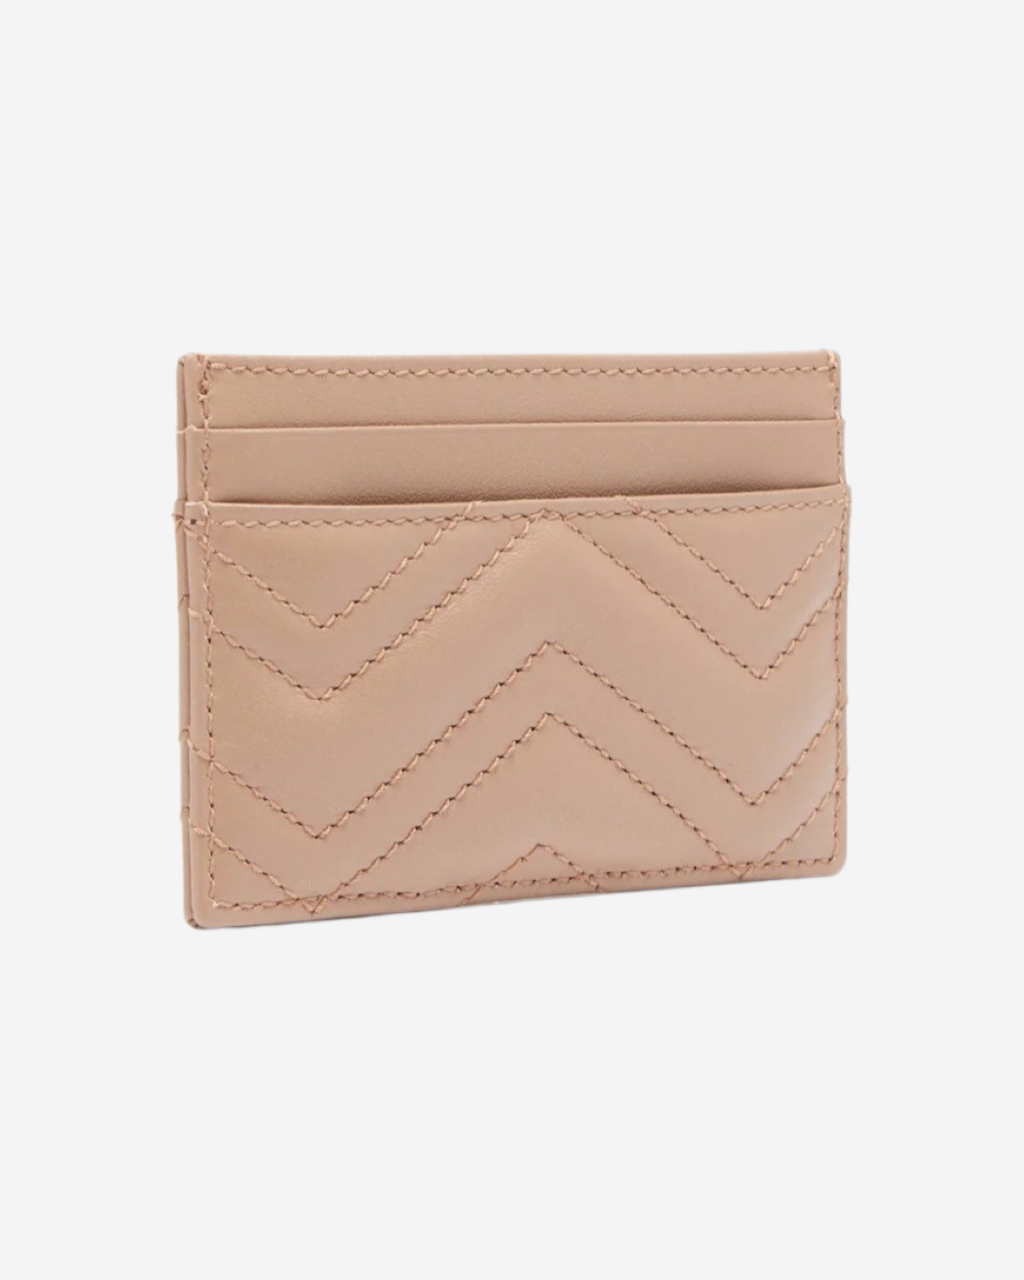 Gucci Marmont card holder